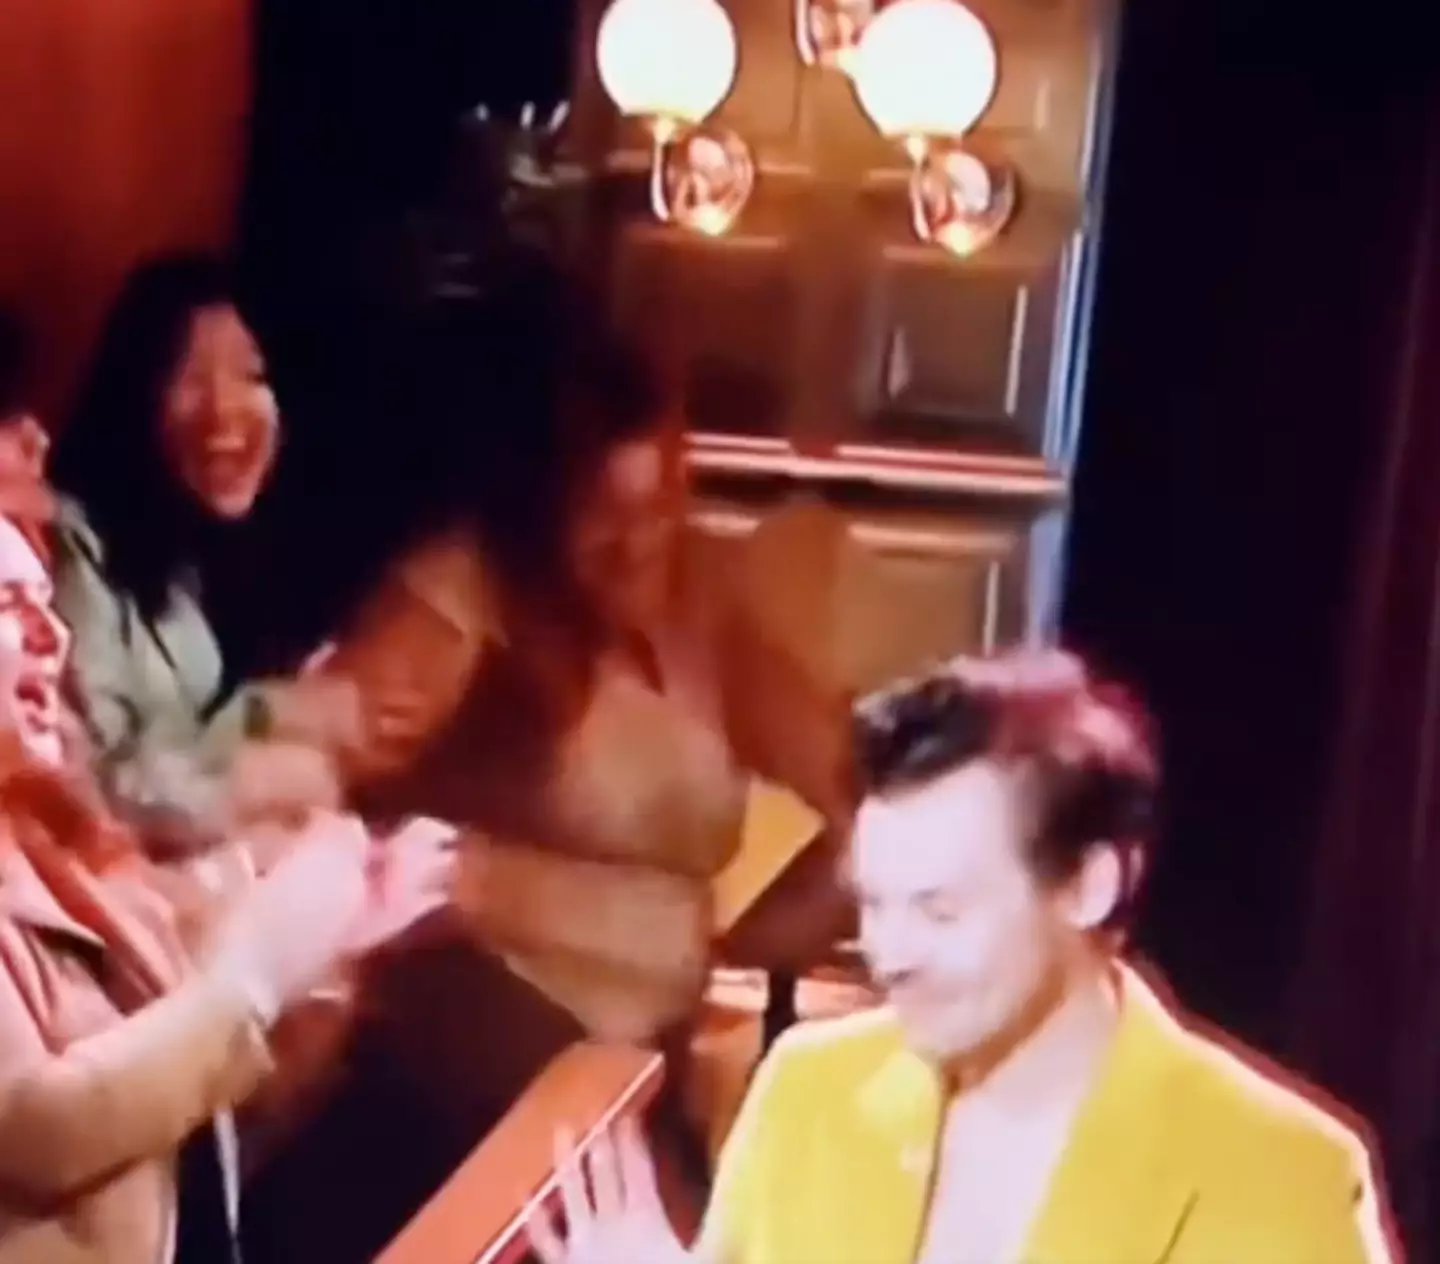 A woman appeared to faint after being fist bumped by Harry Styles.